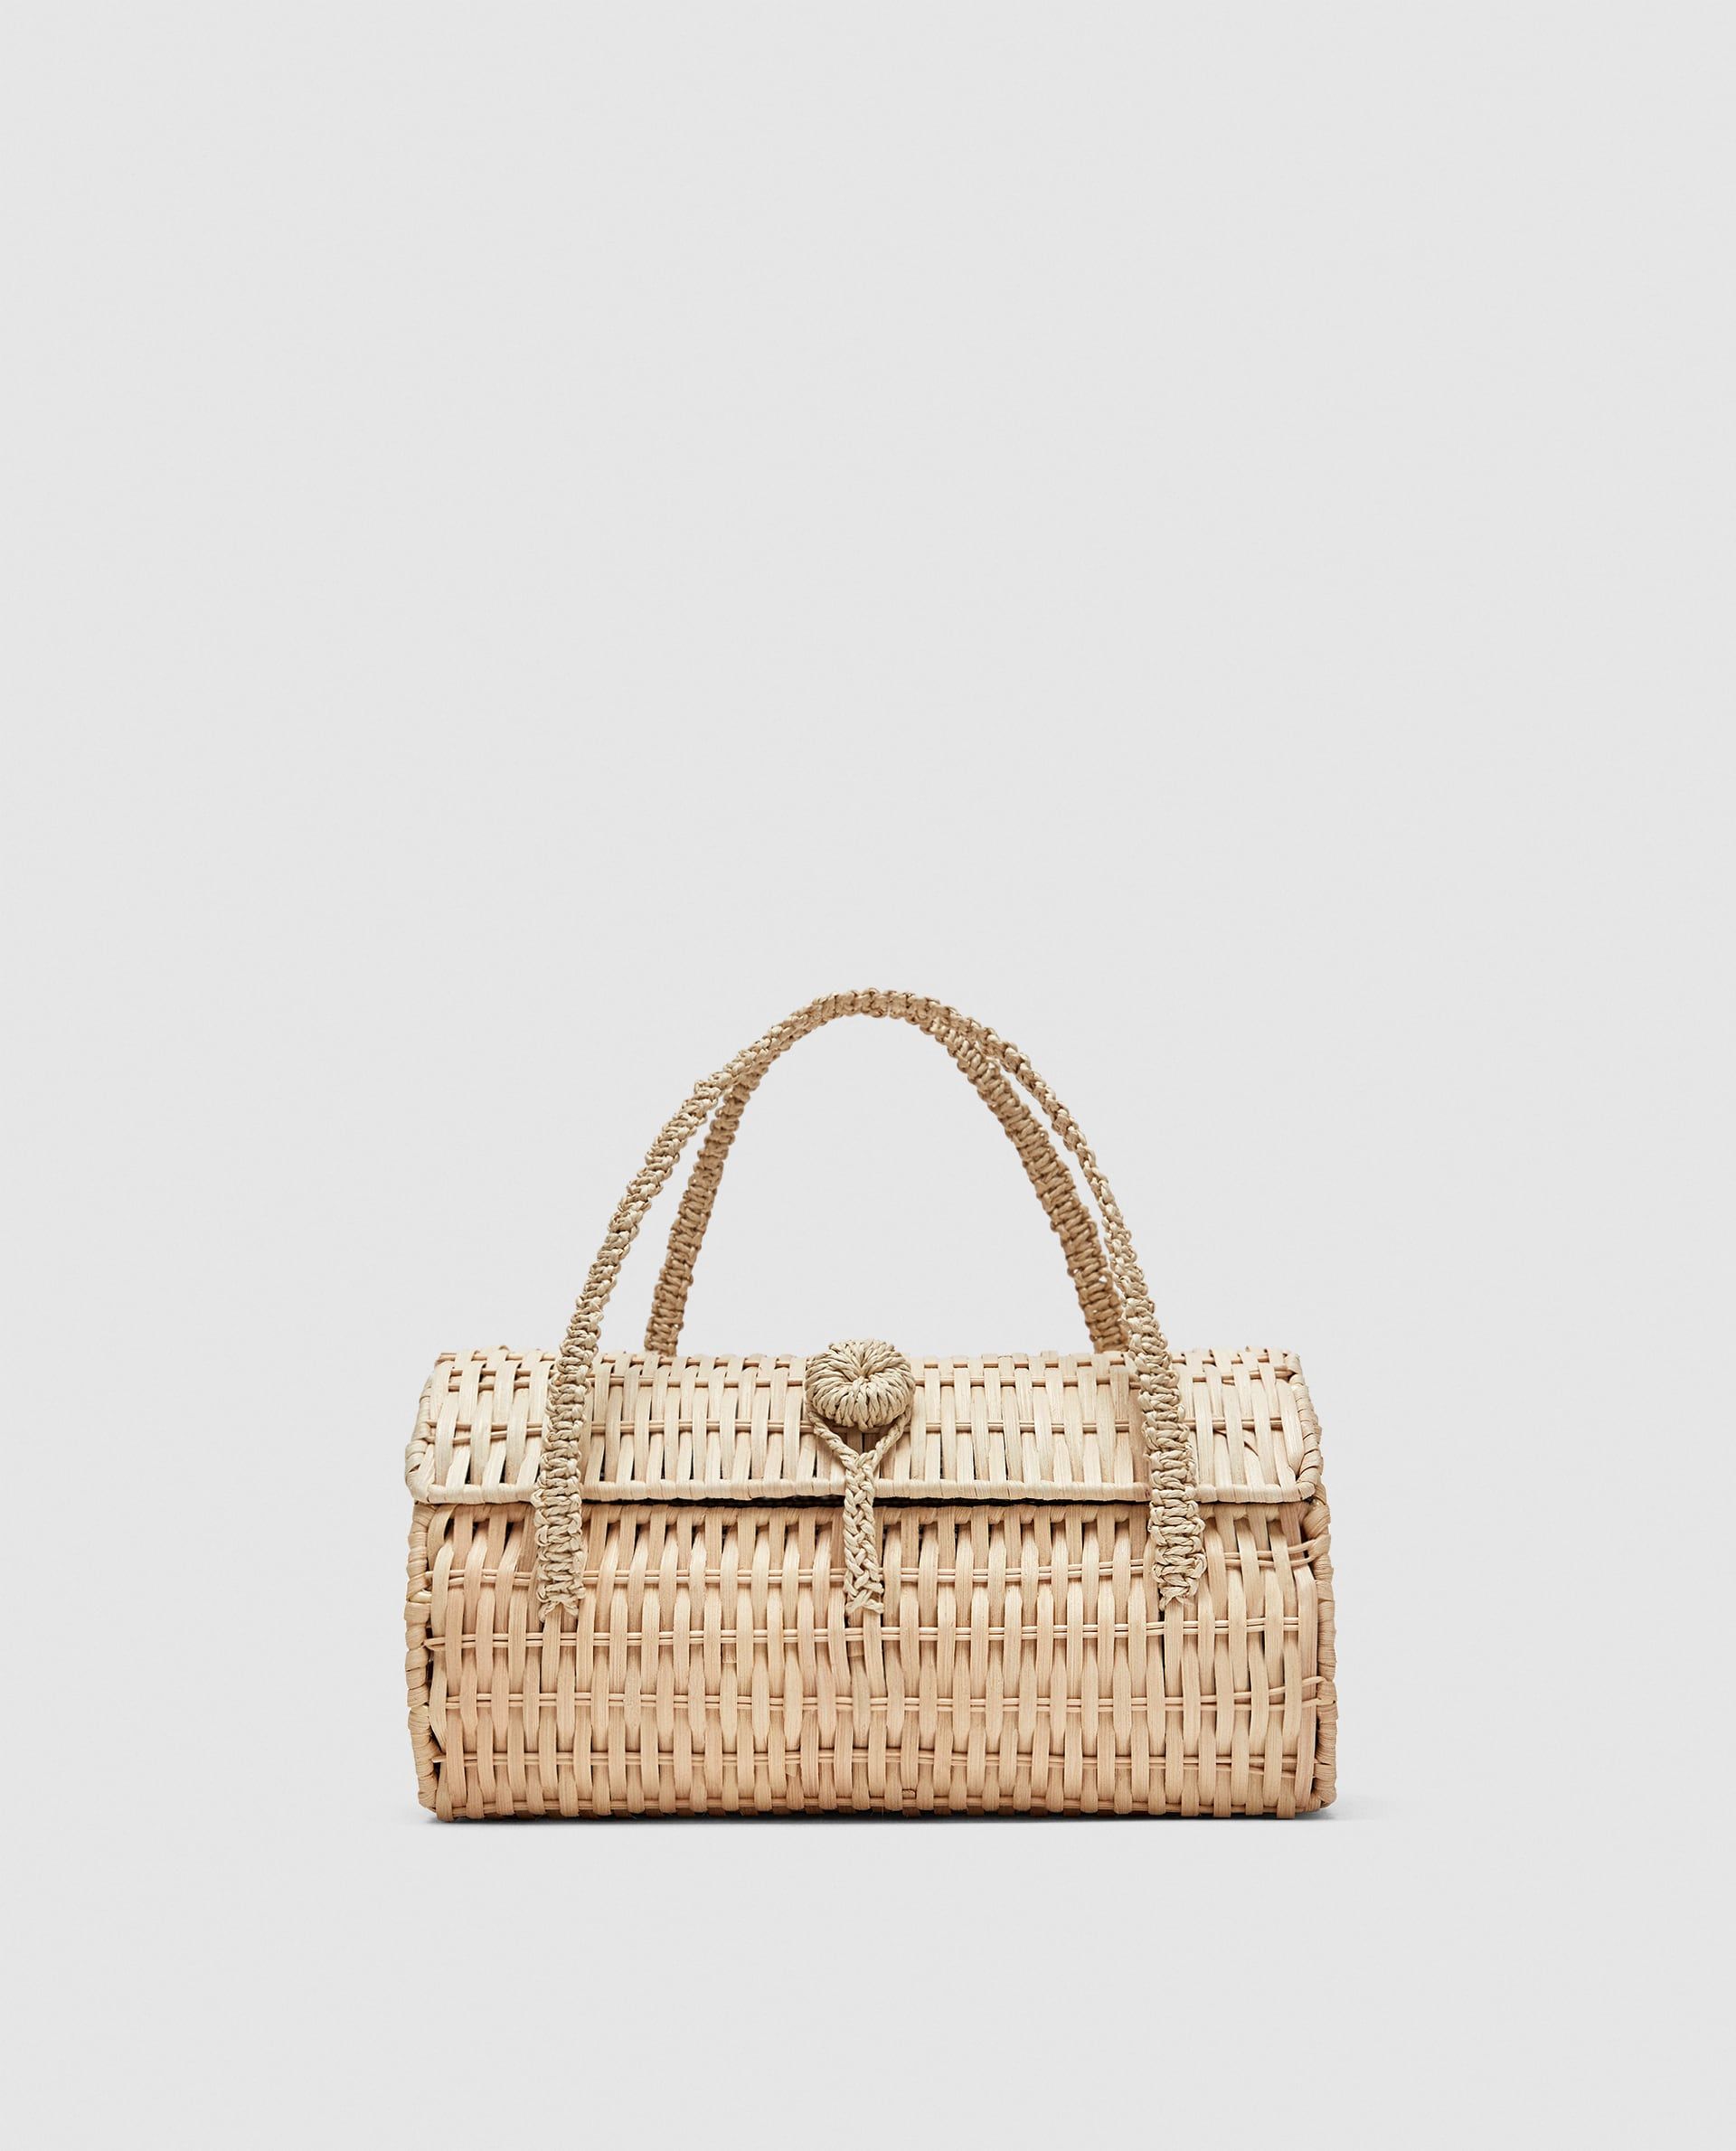 Zara's Newest Bags Are Everything You Want in a Summer Purchase